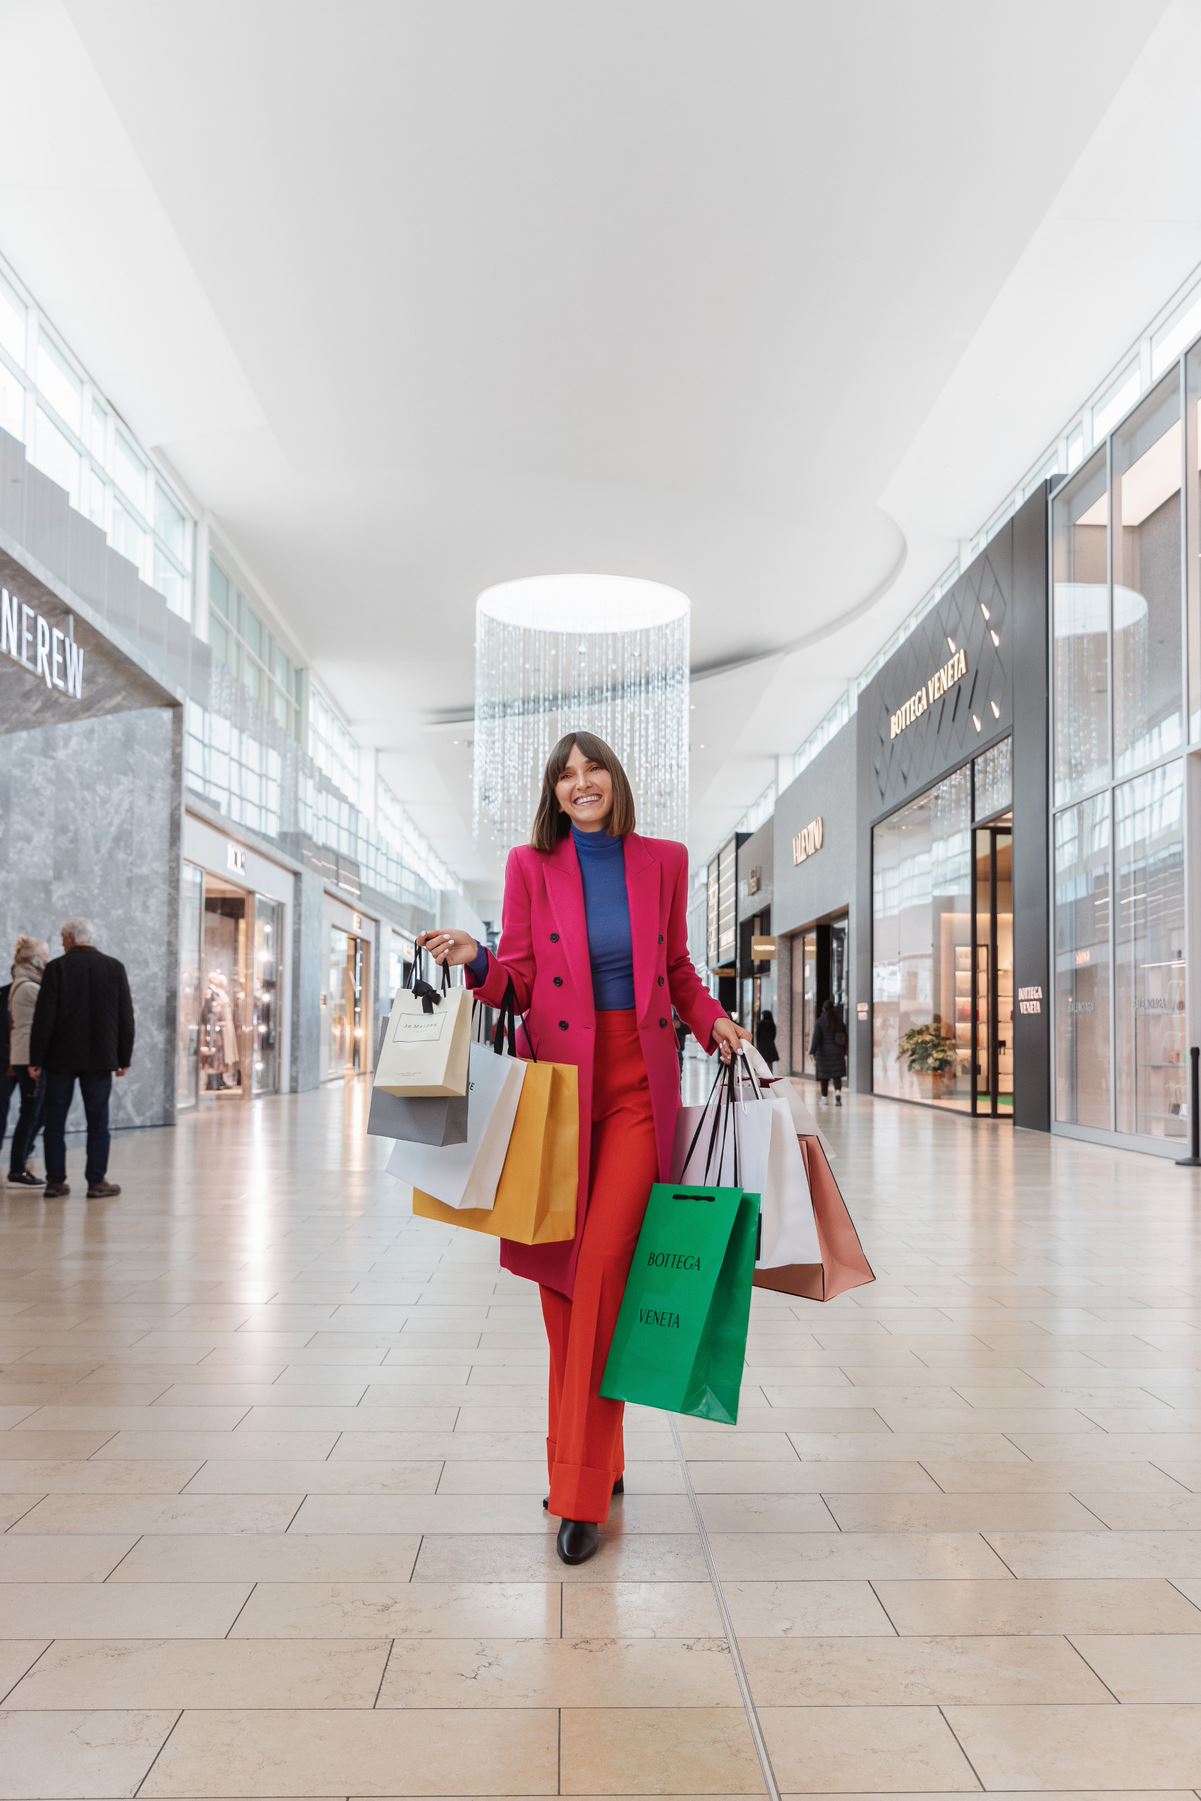 Image of a woman wearing a colourful outfit shopping at Yorkdale shopping centre. She holds several shopping bags and is smiling.